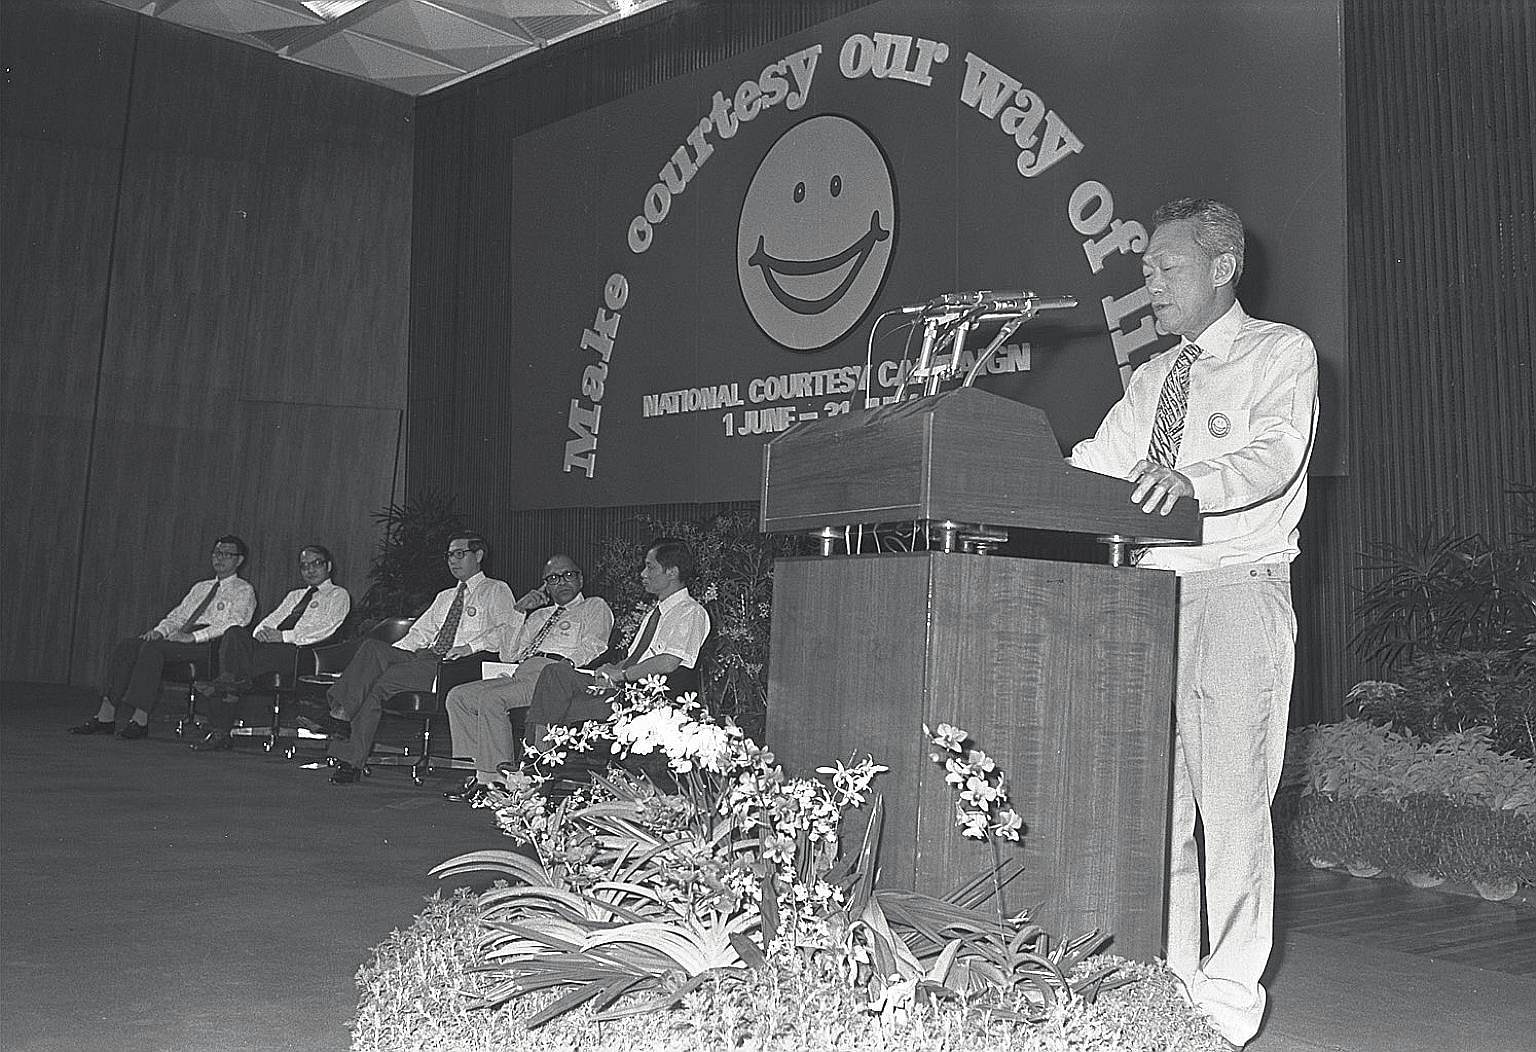 LOOK BACK: Singapore's first national courtesy campaign